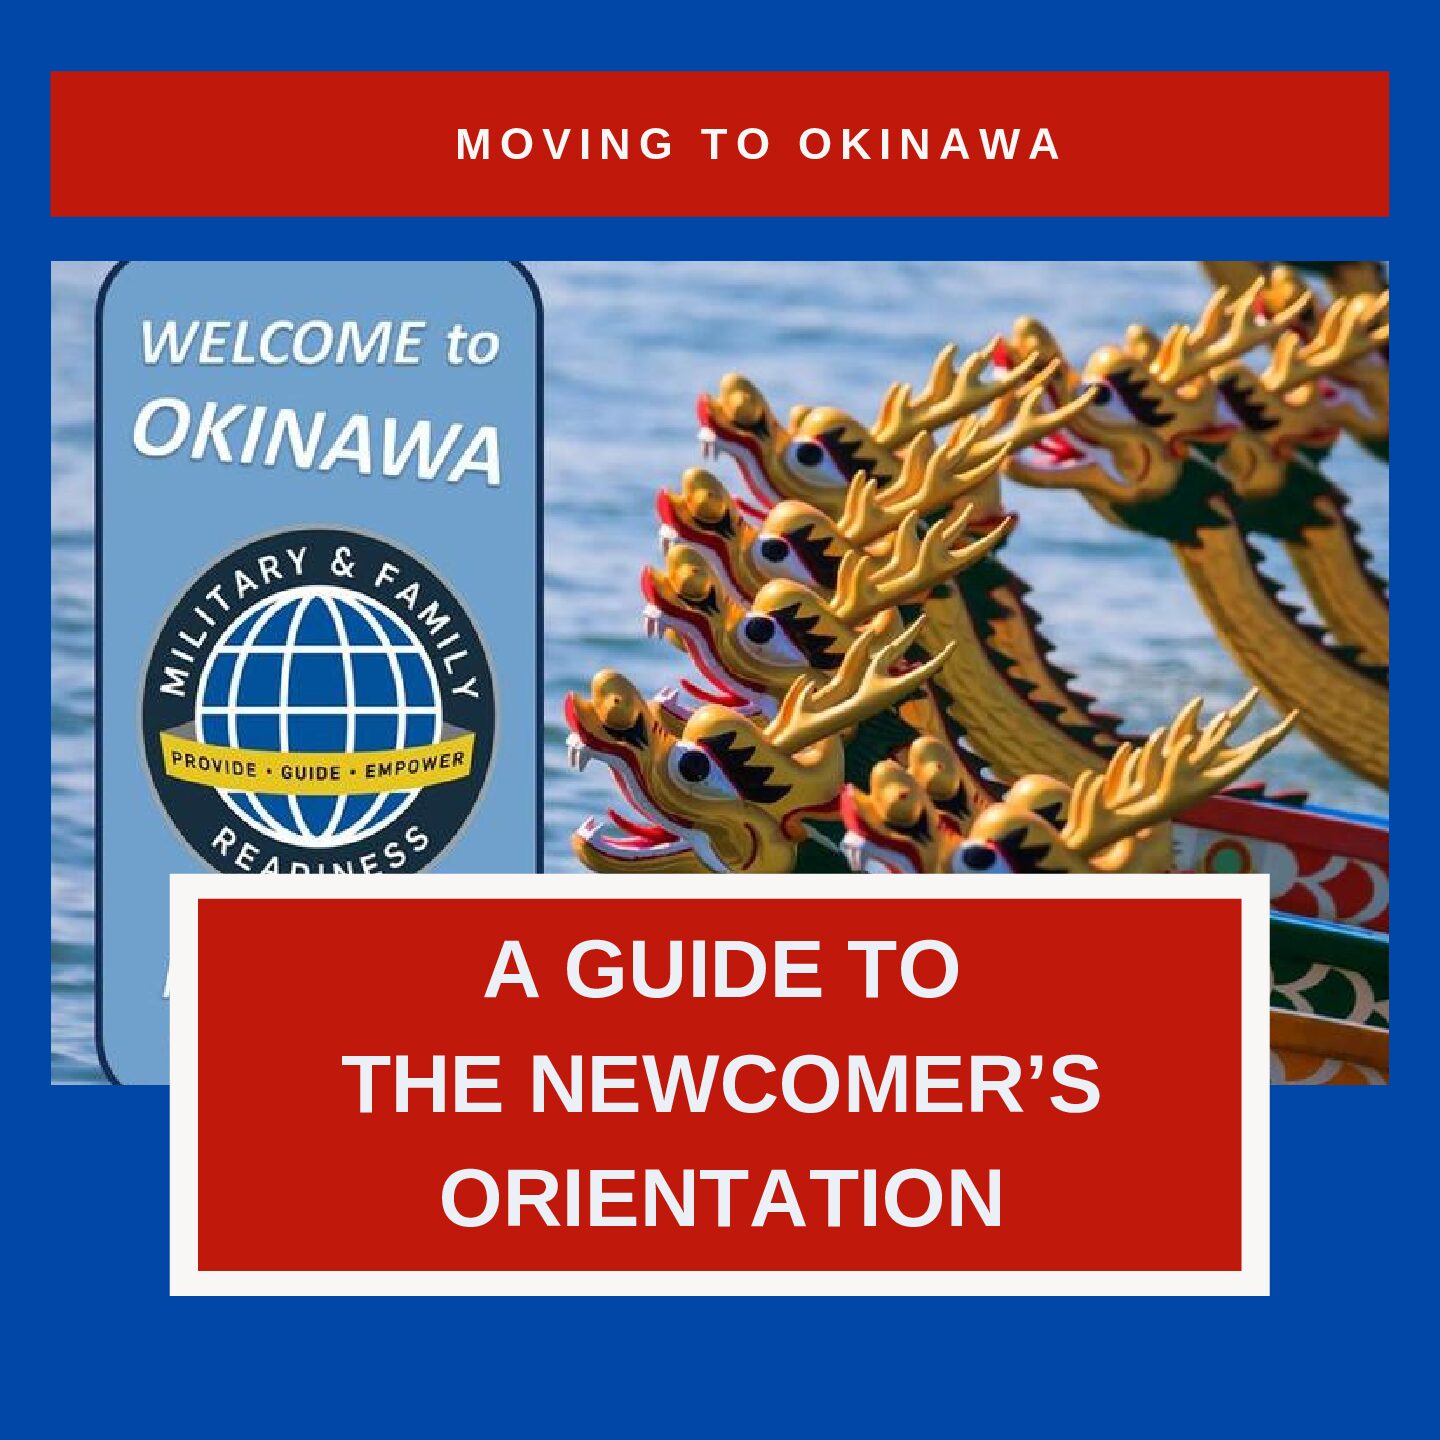 The Ultimate Guide To Your Newcomer’s Orientation in Okinawa – Air Force/Kadena AB